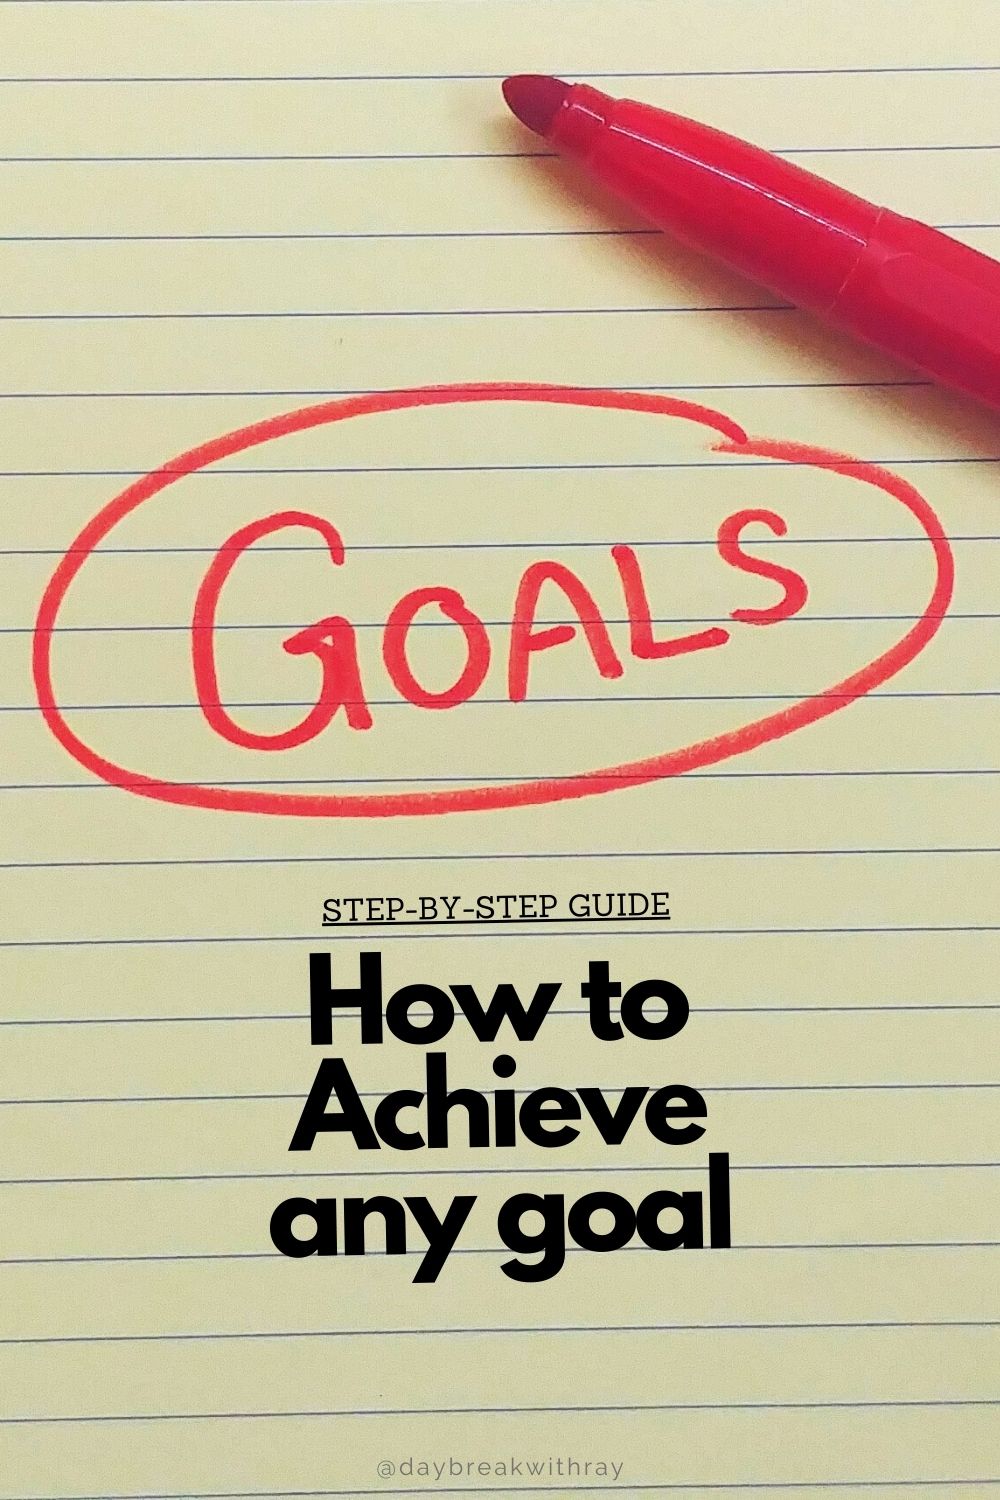 How to achieve any goal step-by-step